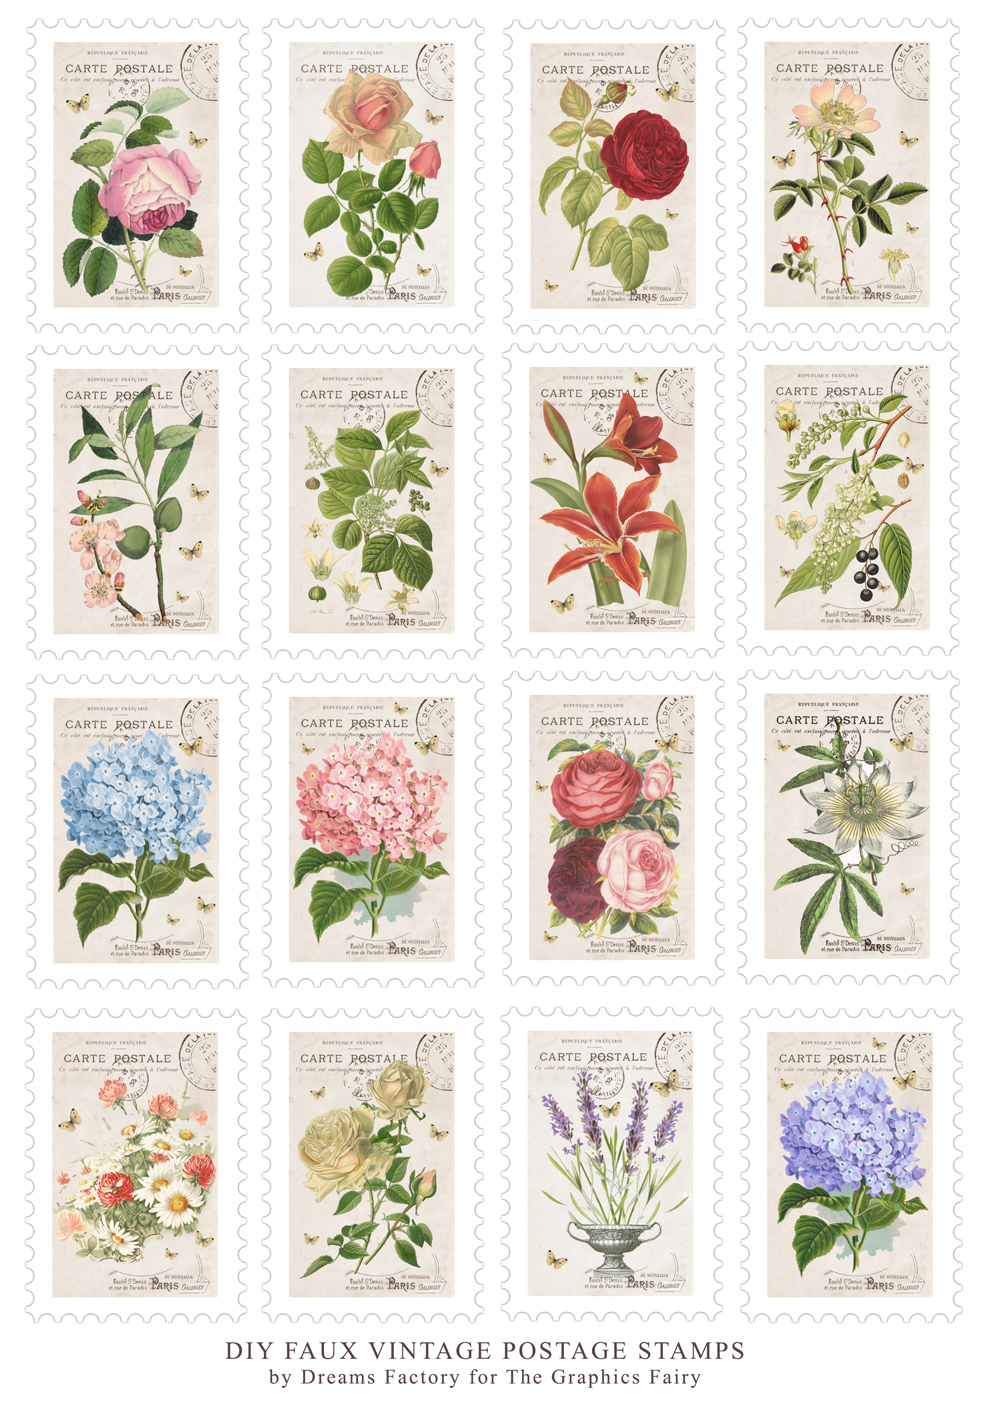 Diy Faux Vintage Postage Stamps Free Printable Free Printable The Graphics Fairy